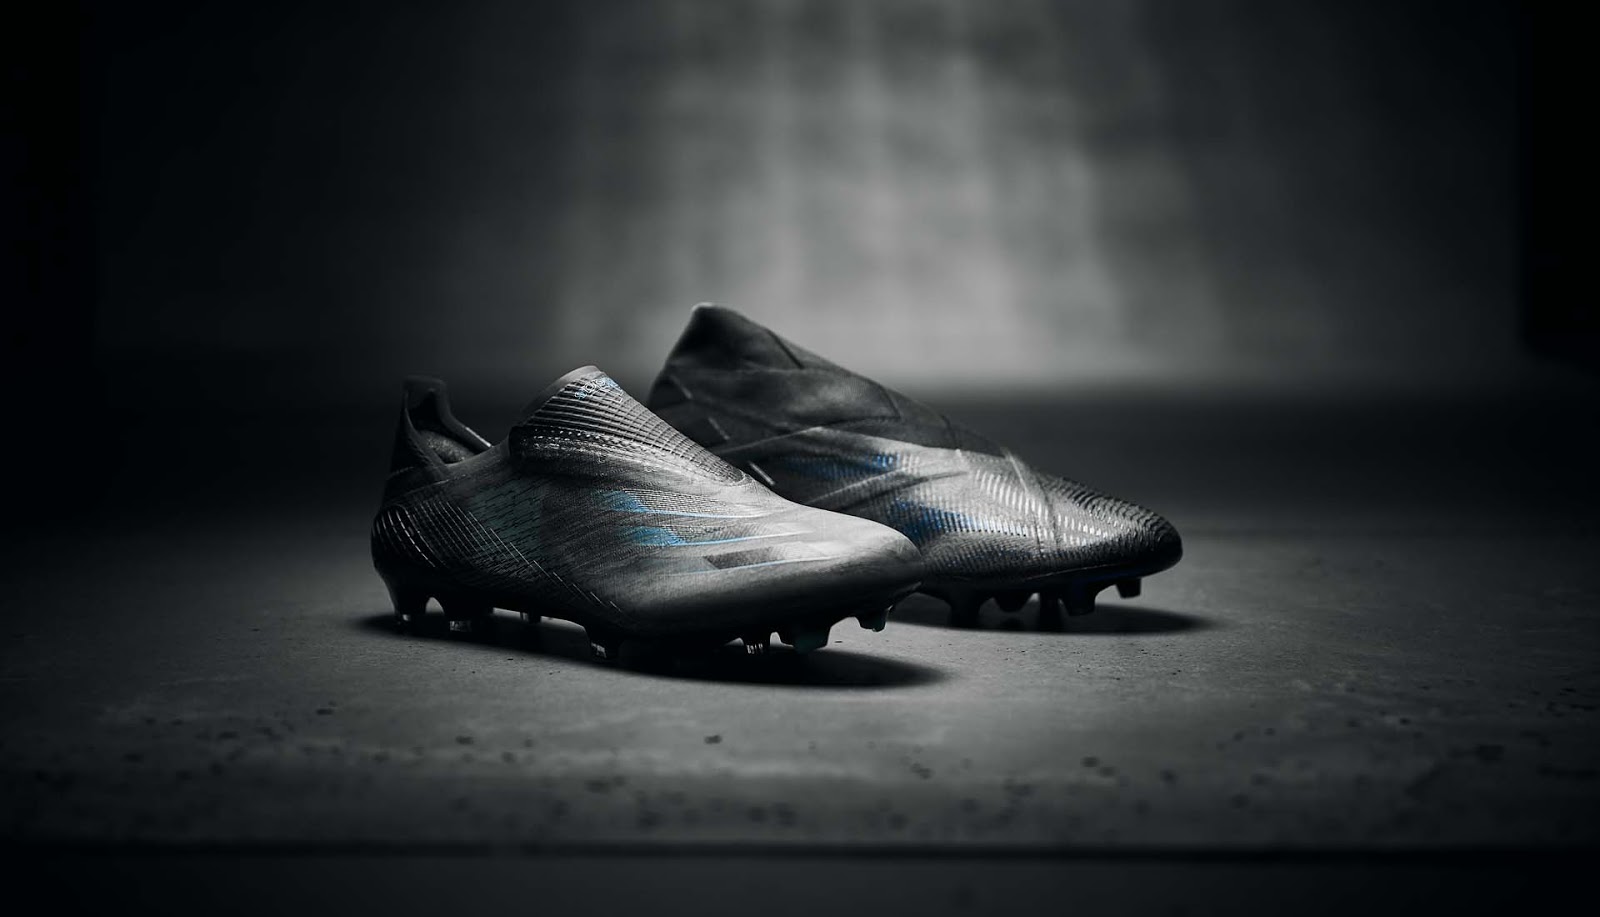 Adidas Pack Unveiled - 2021 Blackout Boots - Waiting for Next-Gen & Copa - Headlines